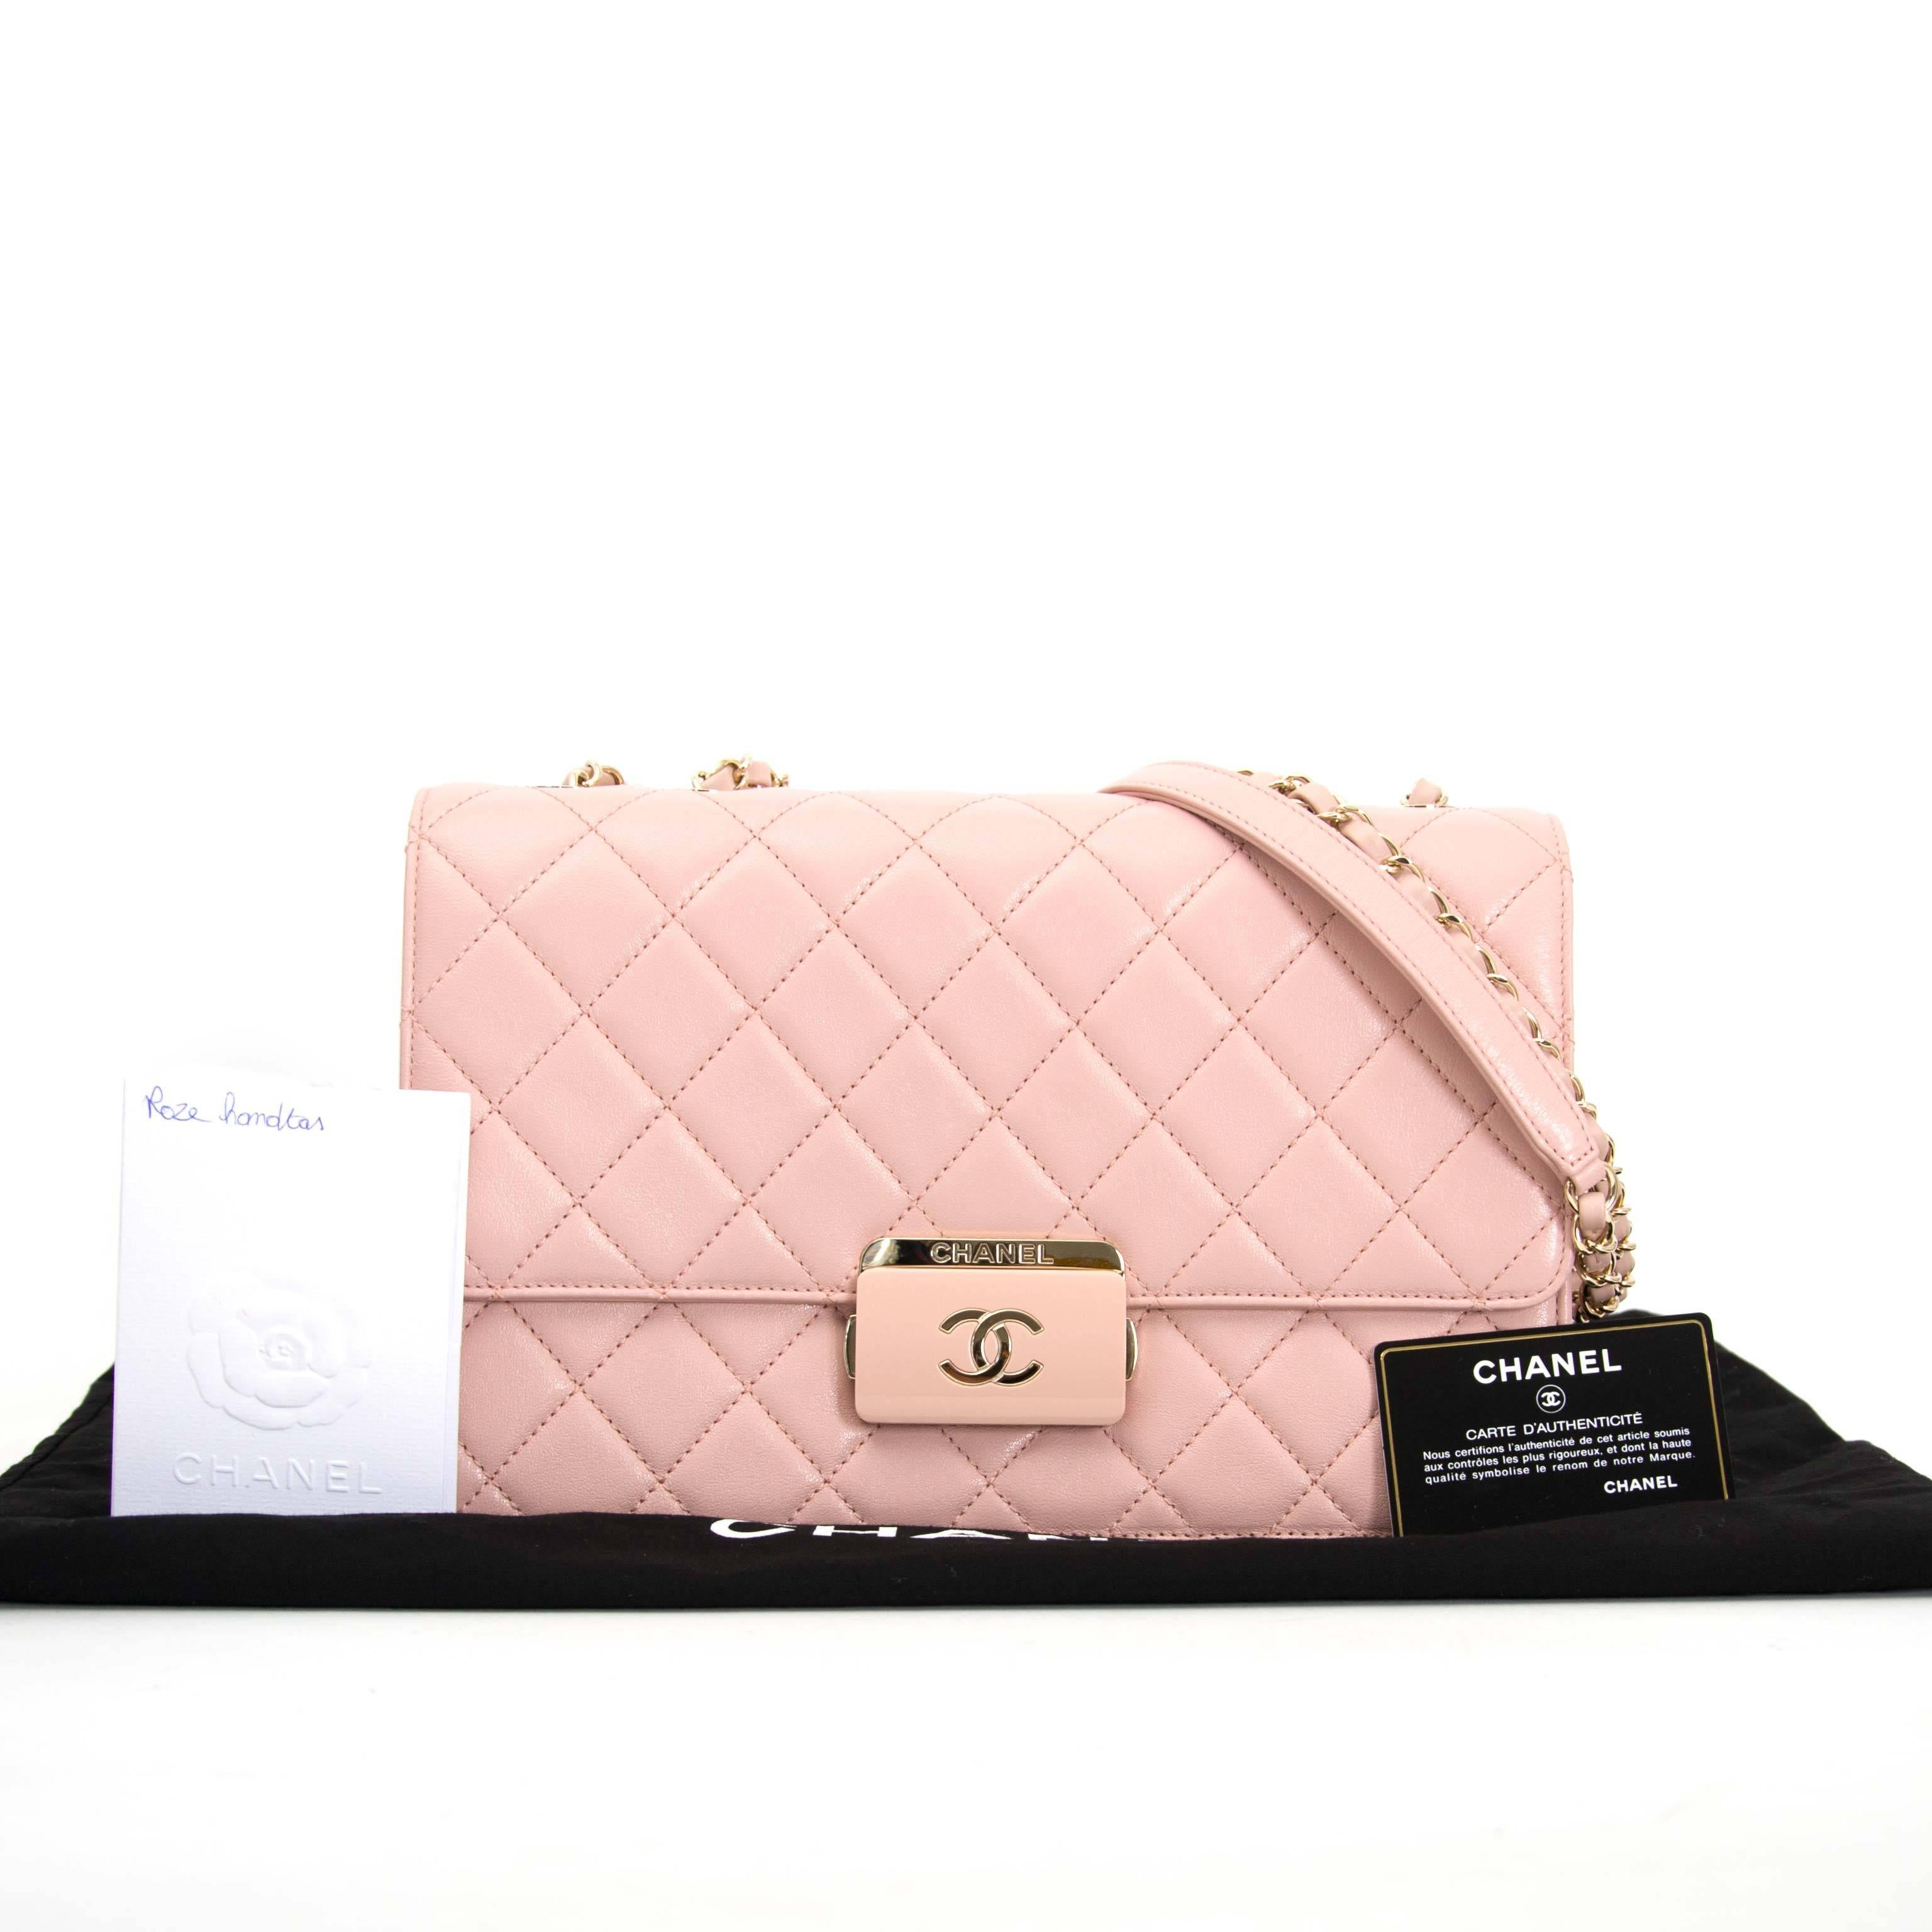 In excellent condition

Chanel Pink Sheepskin Flap Bag

This beautiful Chanel flap bag comes in pink sheepskin leather featuring golden hardware.

The bag has a pink leather golden chain strap and closes with a click system.

The interior contains 2